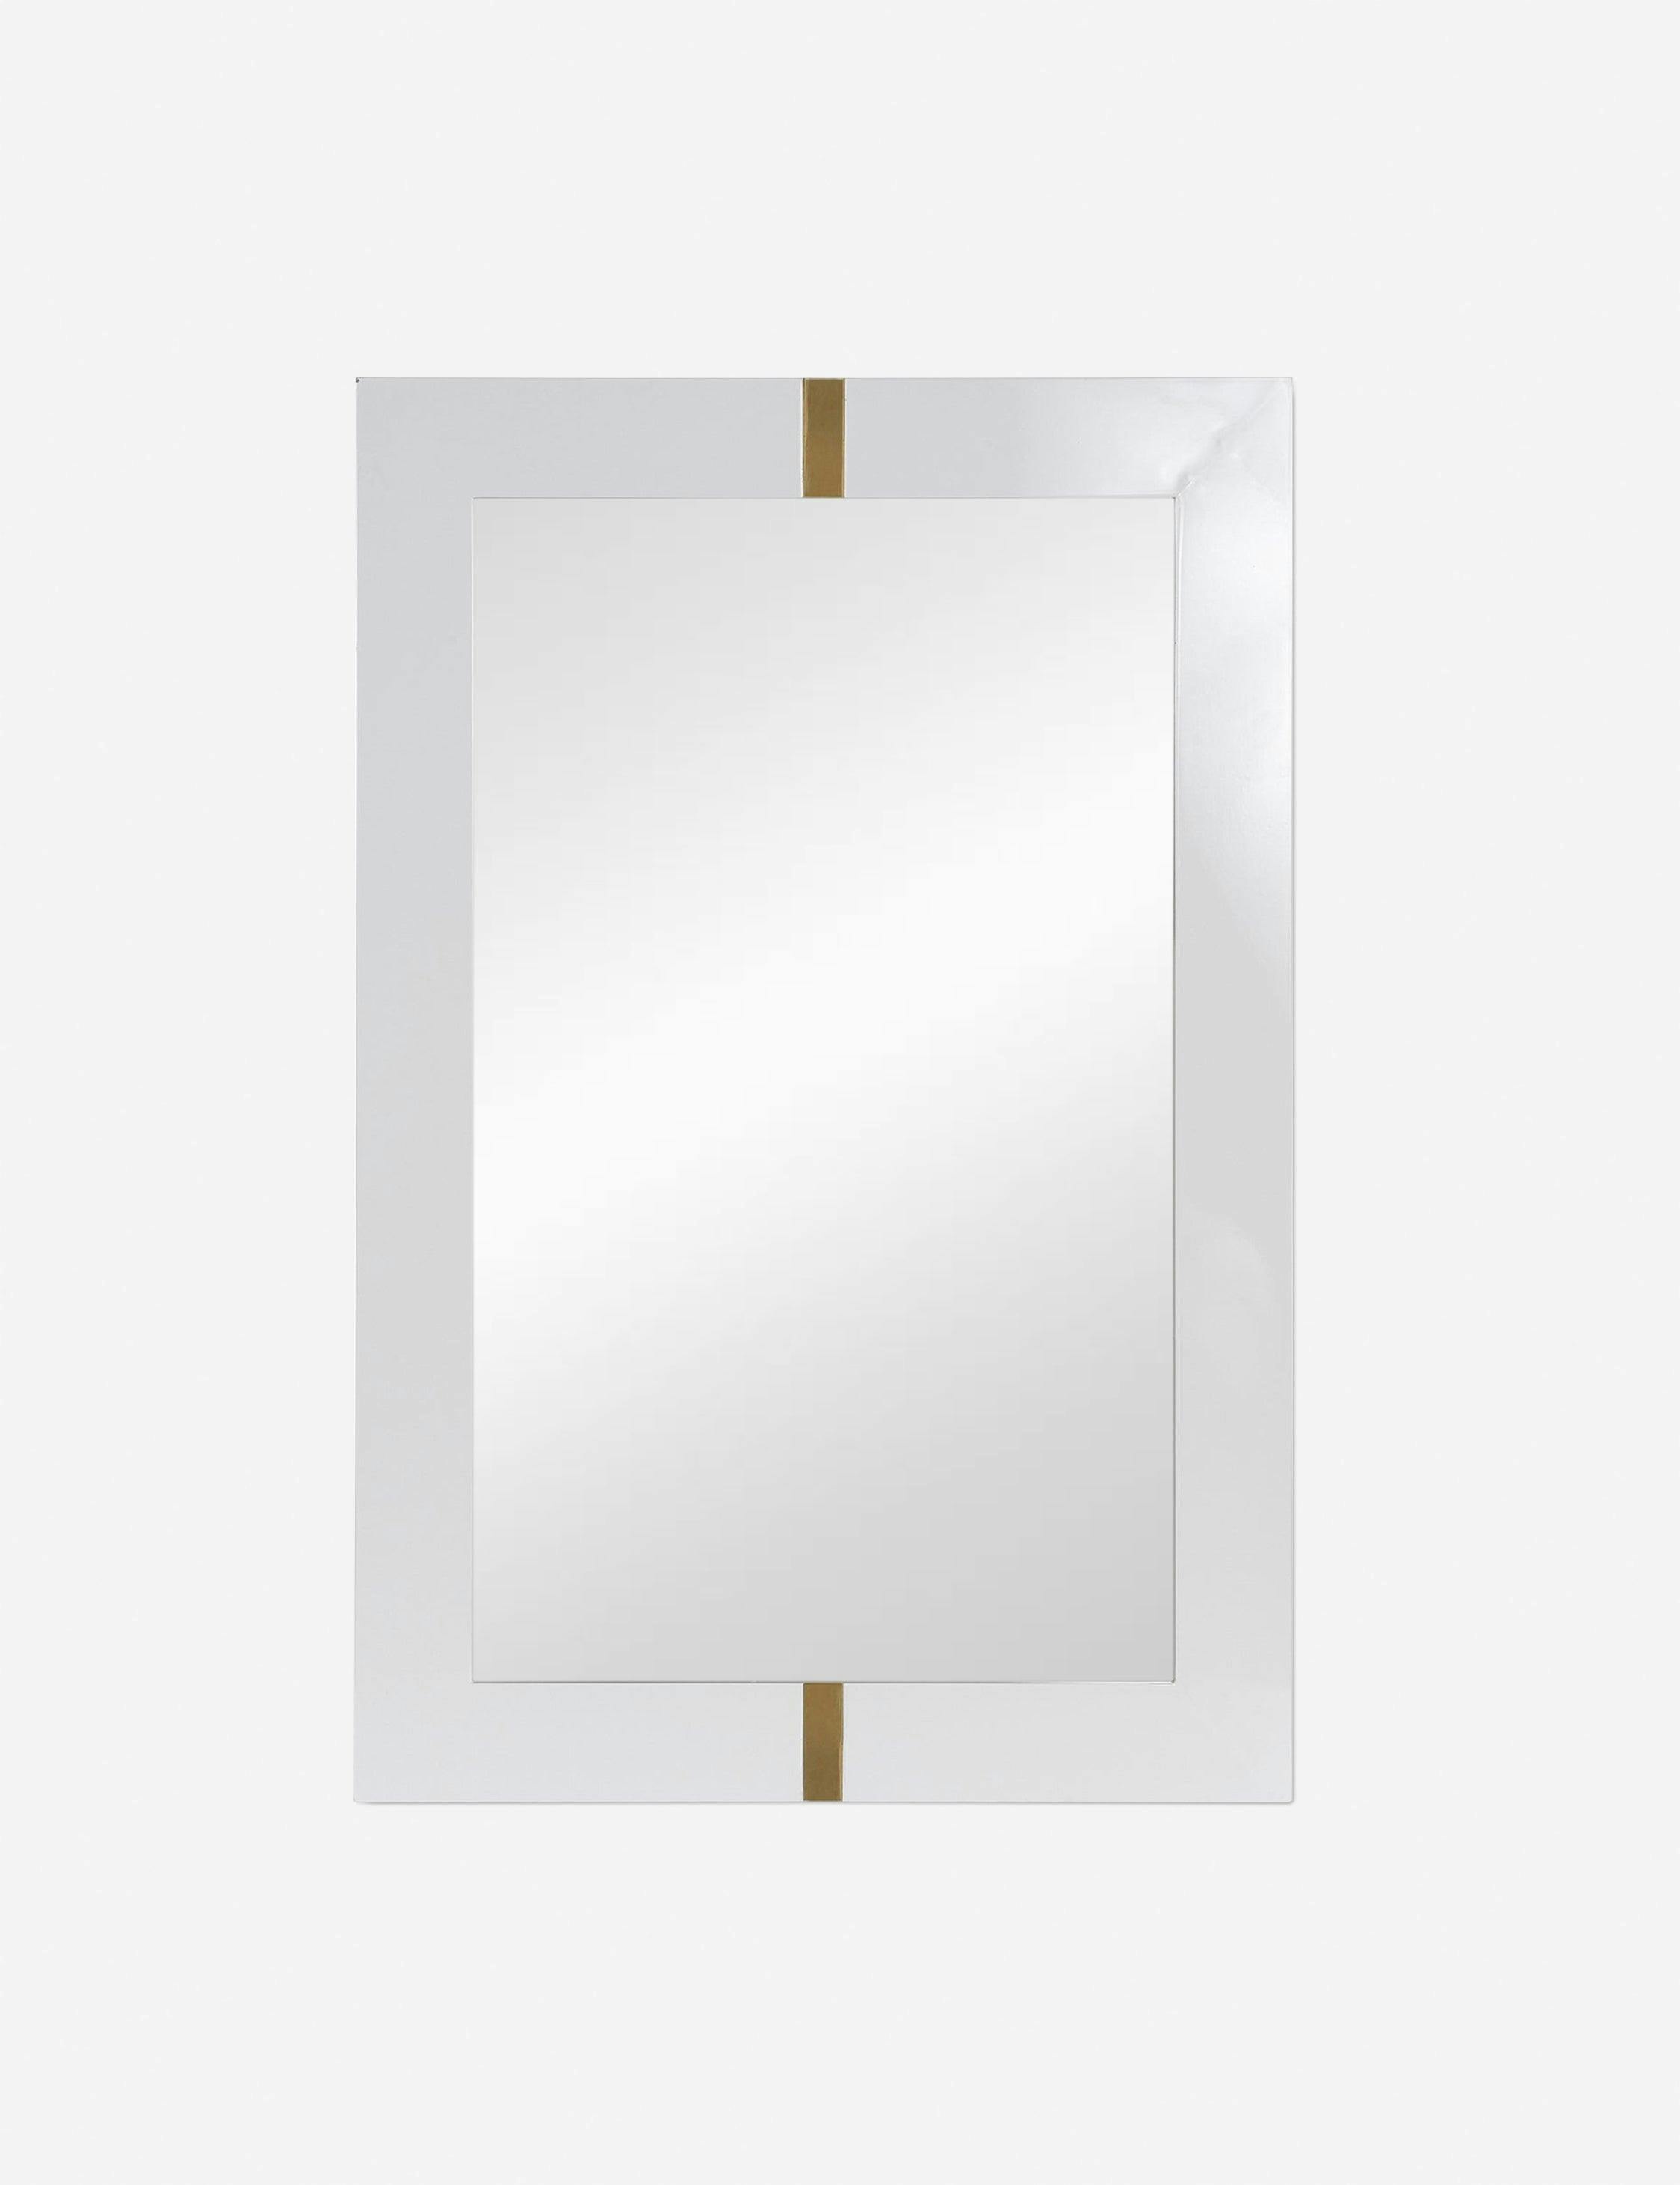 Liana 36"x24" Rectangular Wood Mirror with Gold Accents